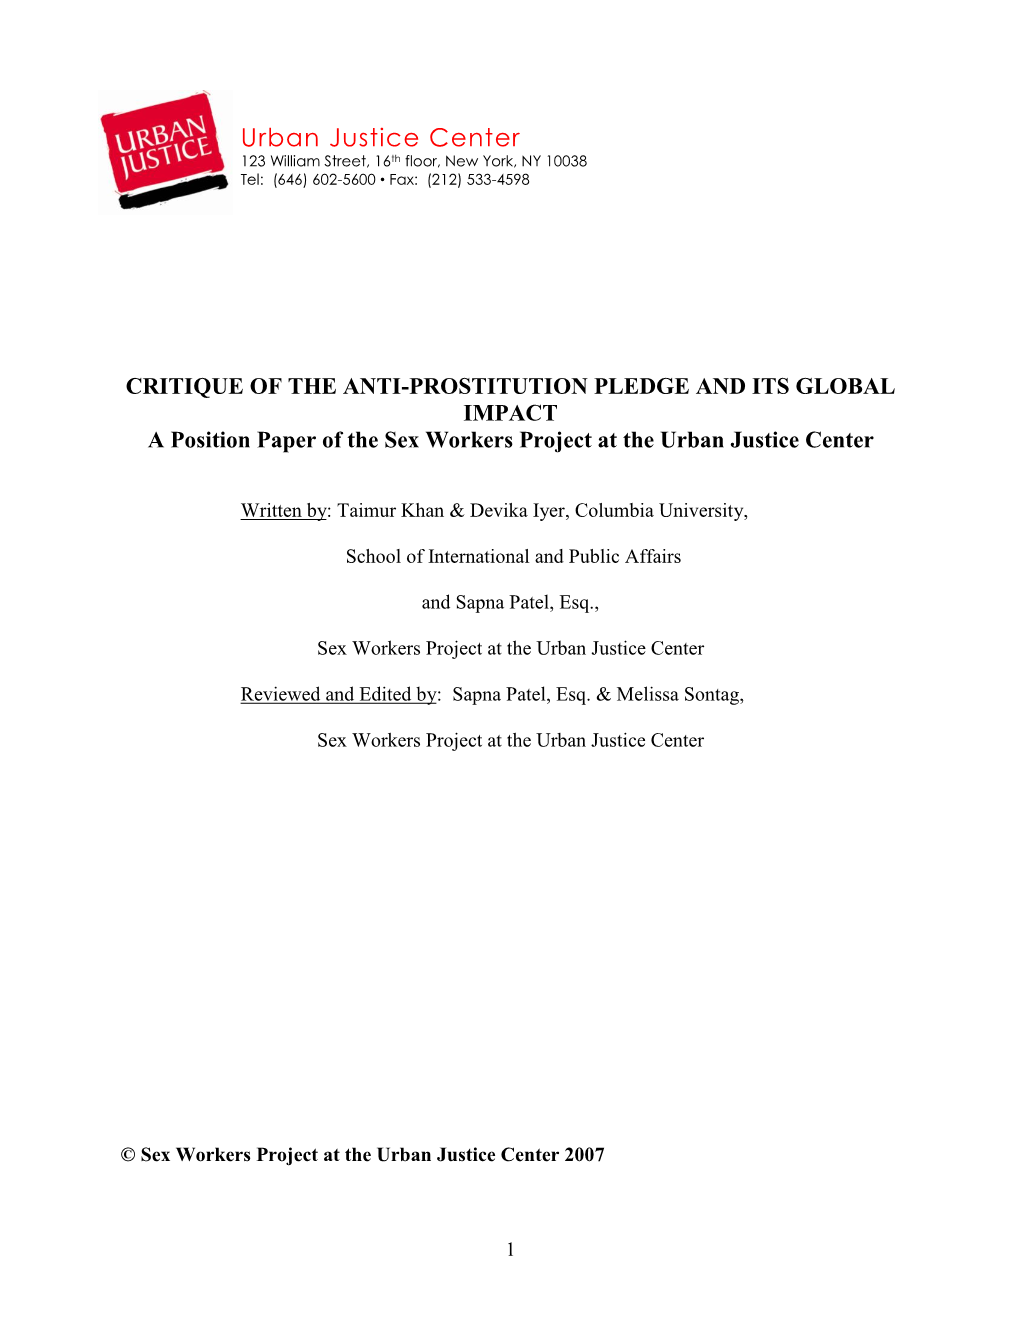 THE ANTI-PROSTITUTION PLEDGE and ITS GLOBAL IMPACT a Position Paper of the Sex Workers Project at the Urban Justice Center